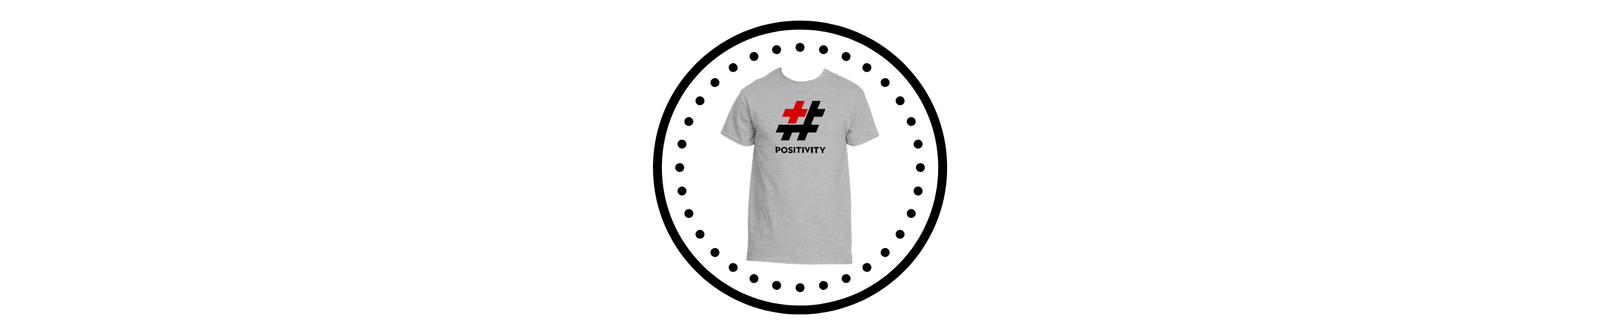 The Official Hashtag Positivity T-Shirt!